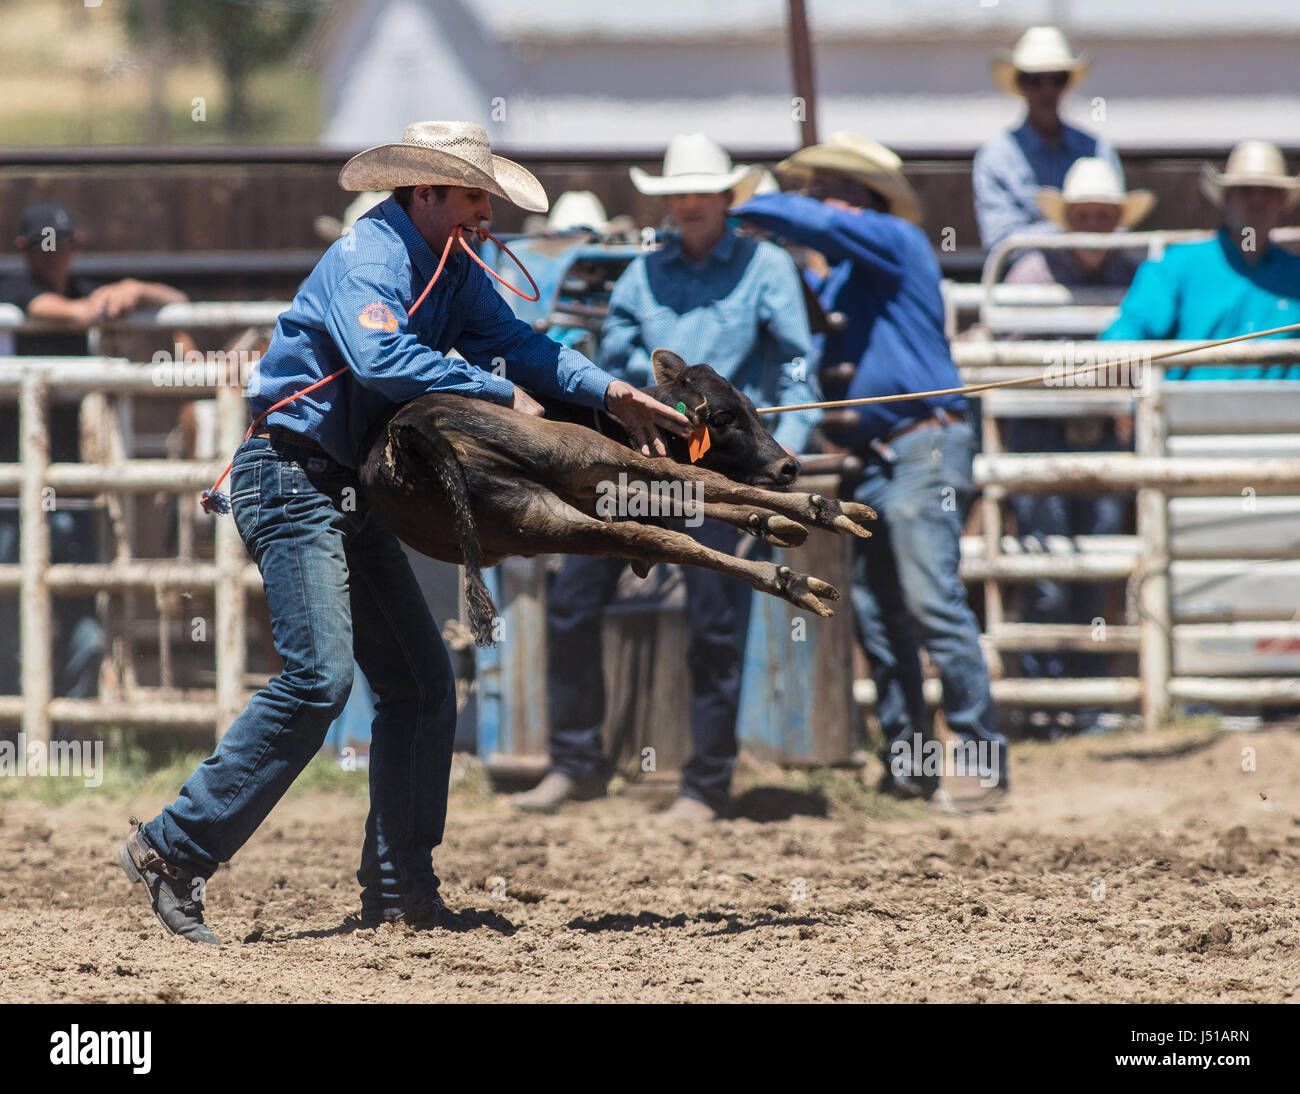 Calf roping cowboy at the rodeo in Cottonwood, California. Stock Photo